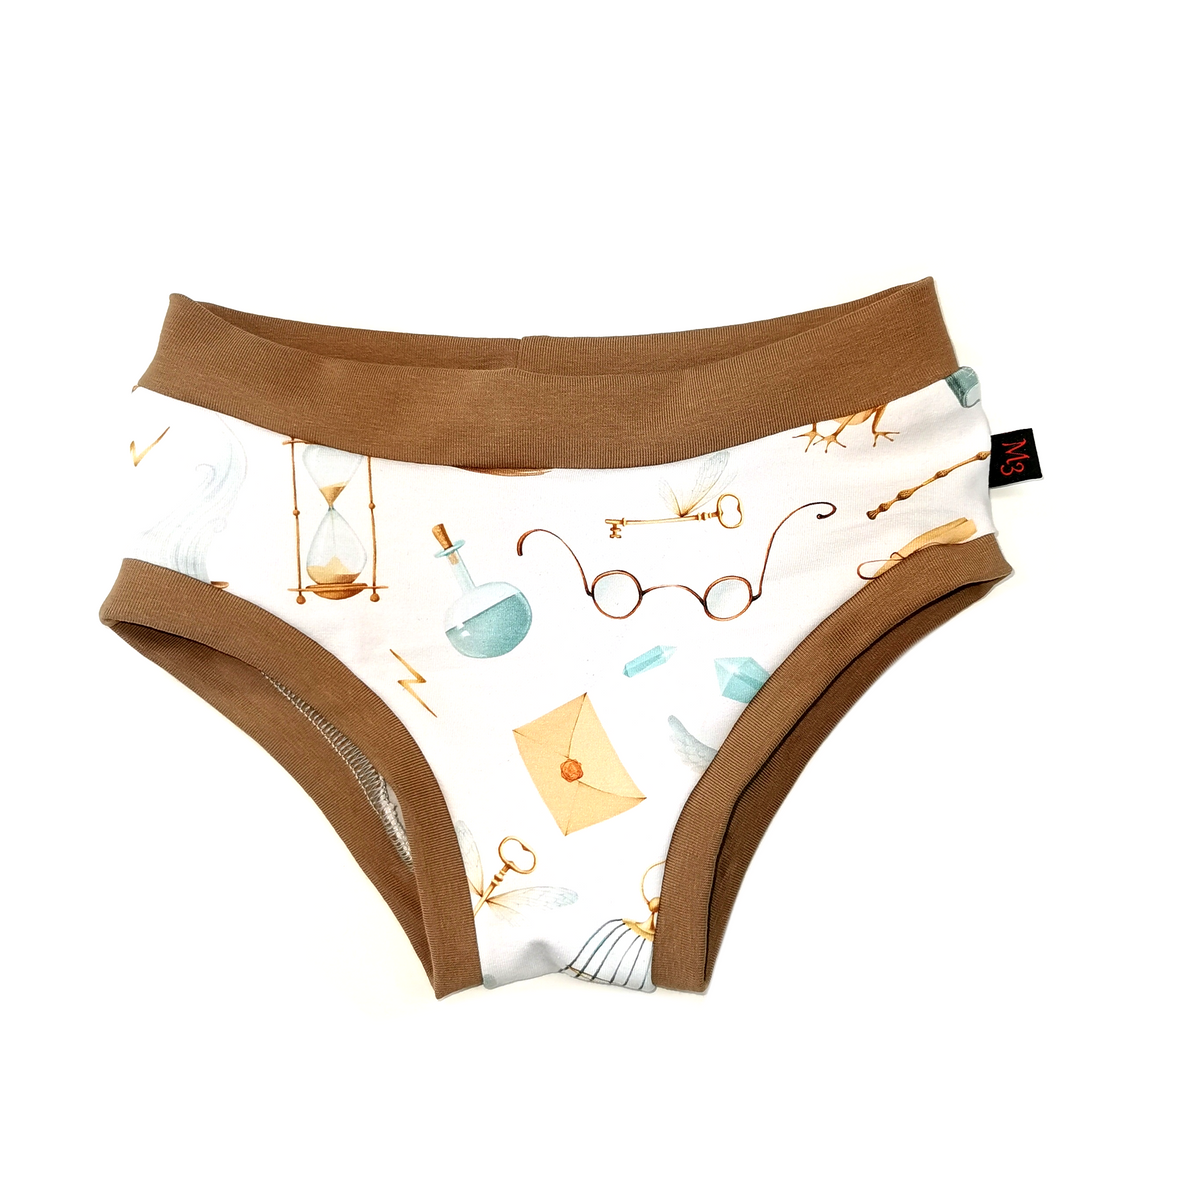 Créations M3 | Children's underwear | School of Witchcraft (ready-to-go)